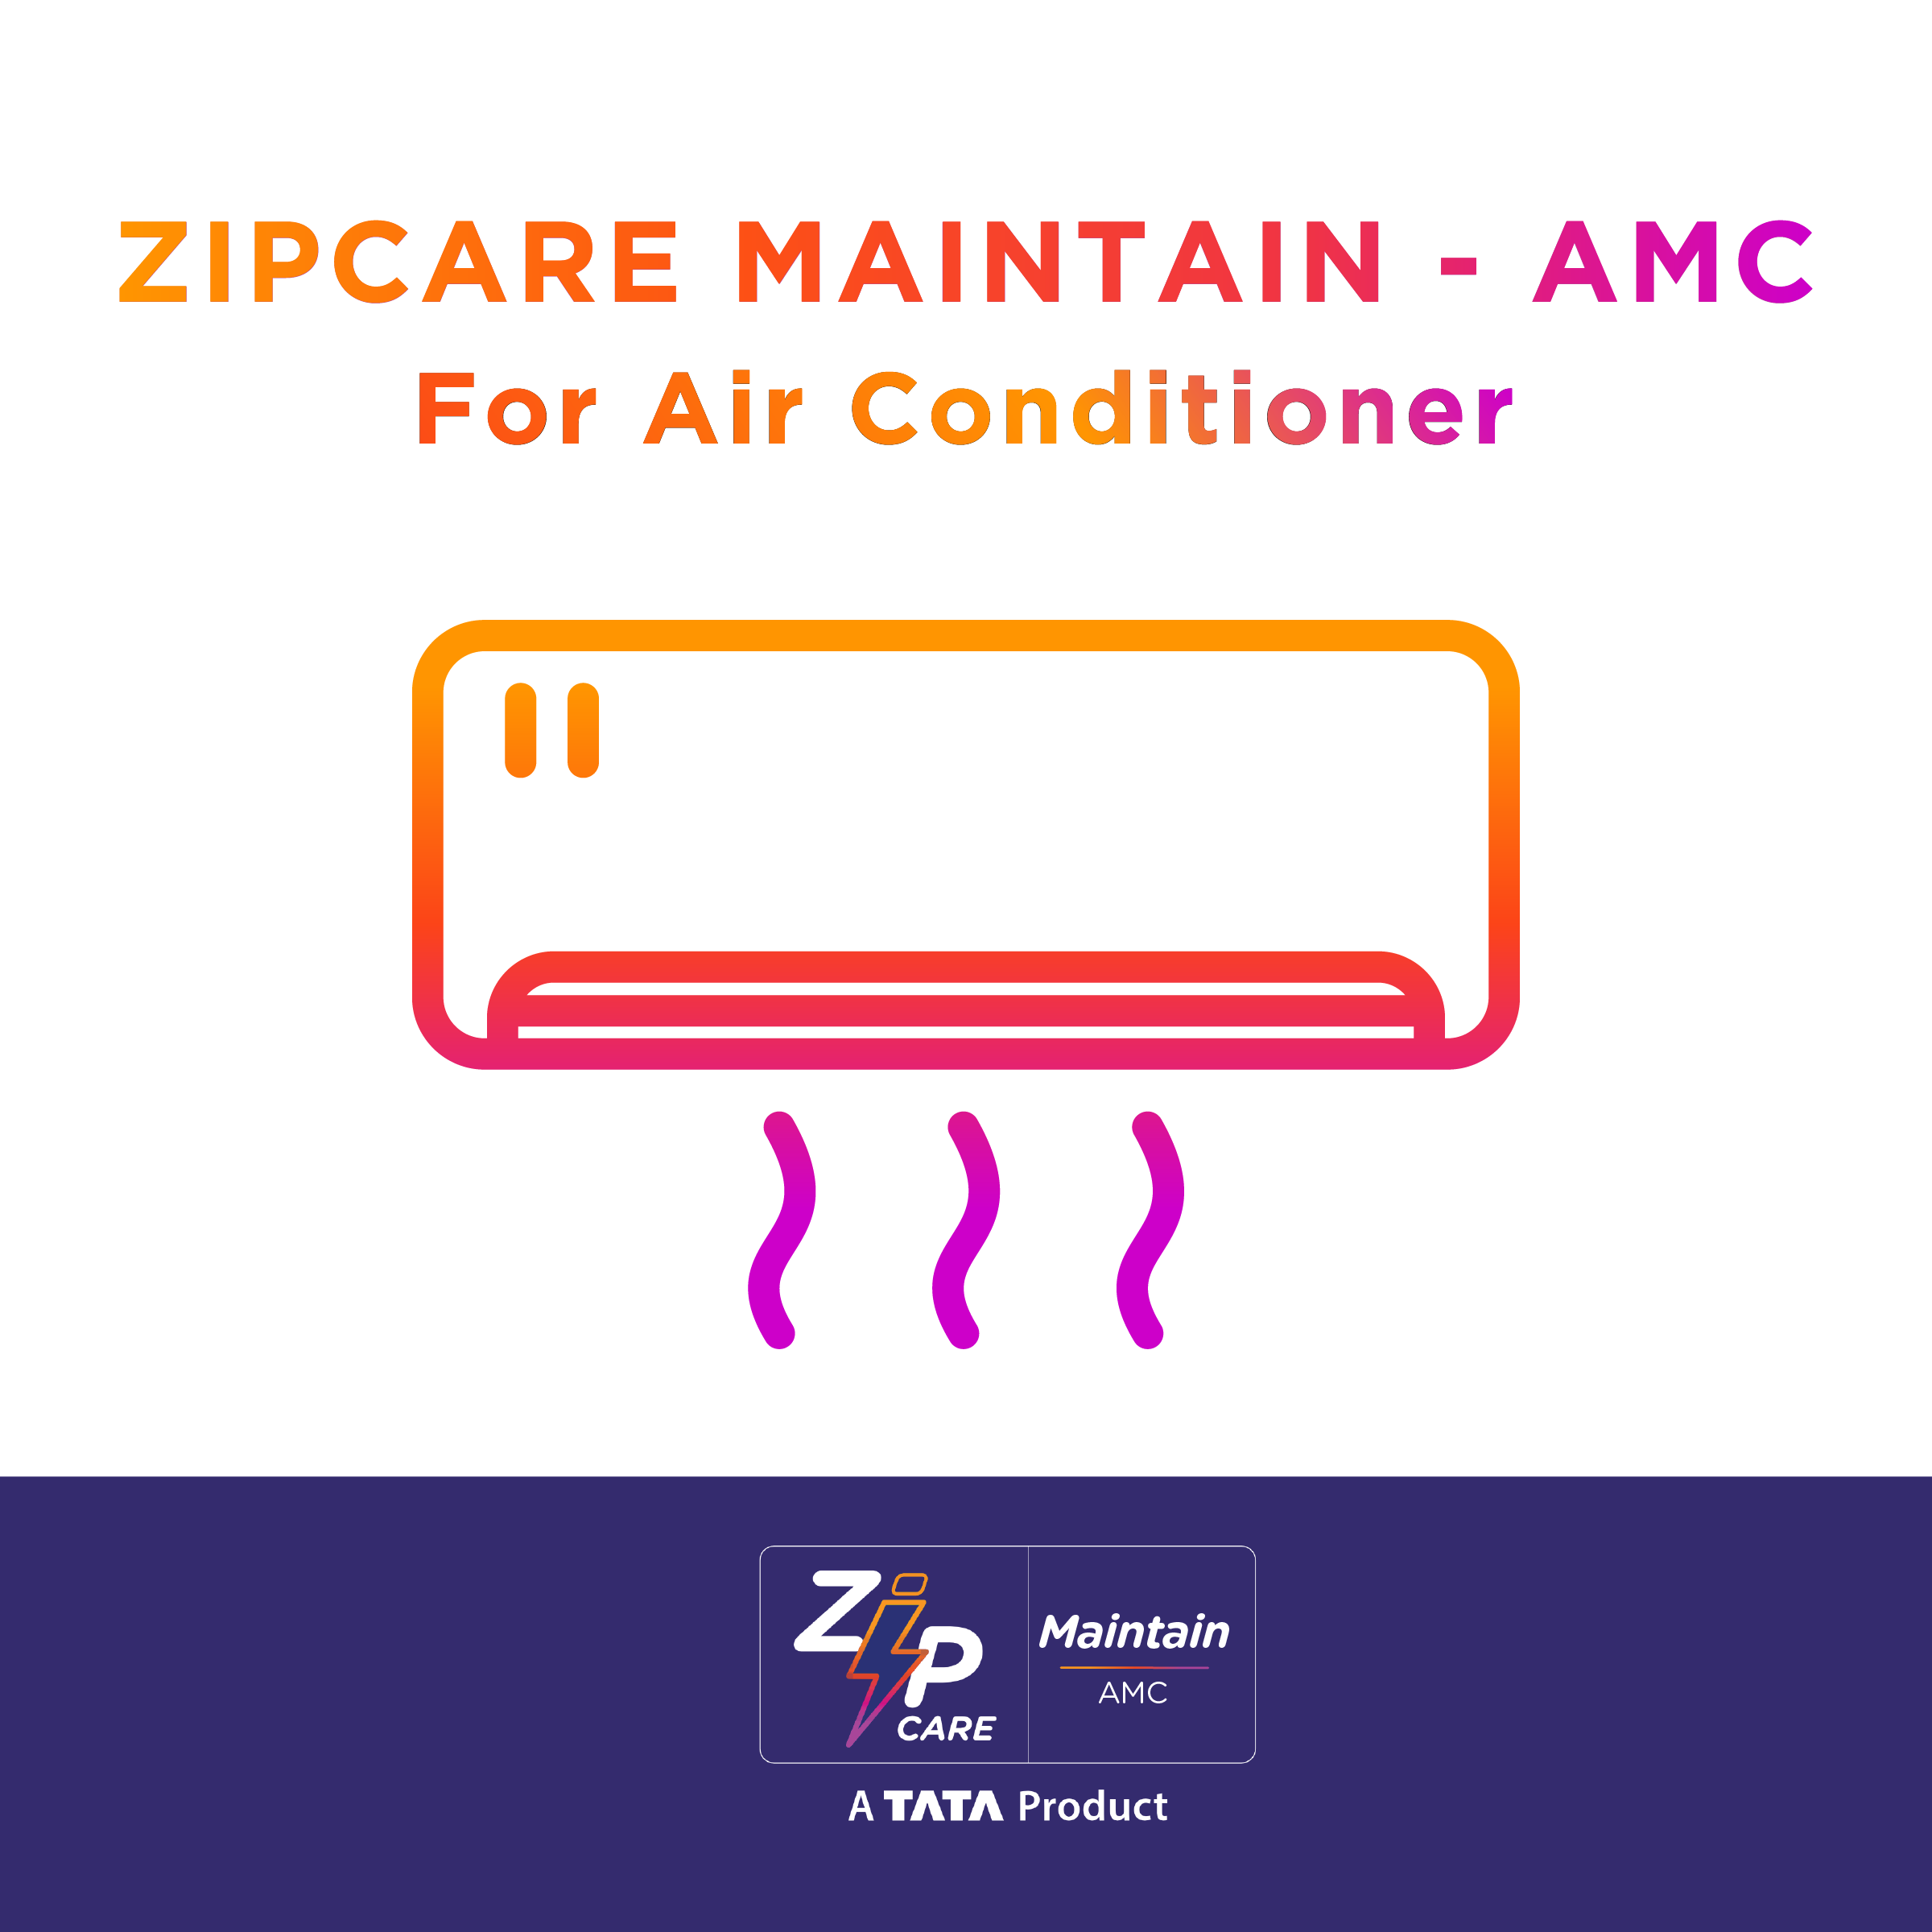 ZipCare Annual Maintenance Contract (AMC) for Air Conditioner_1